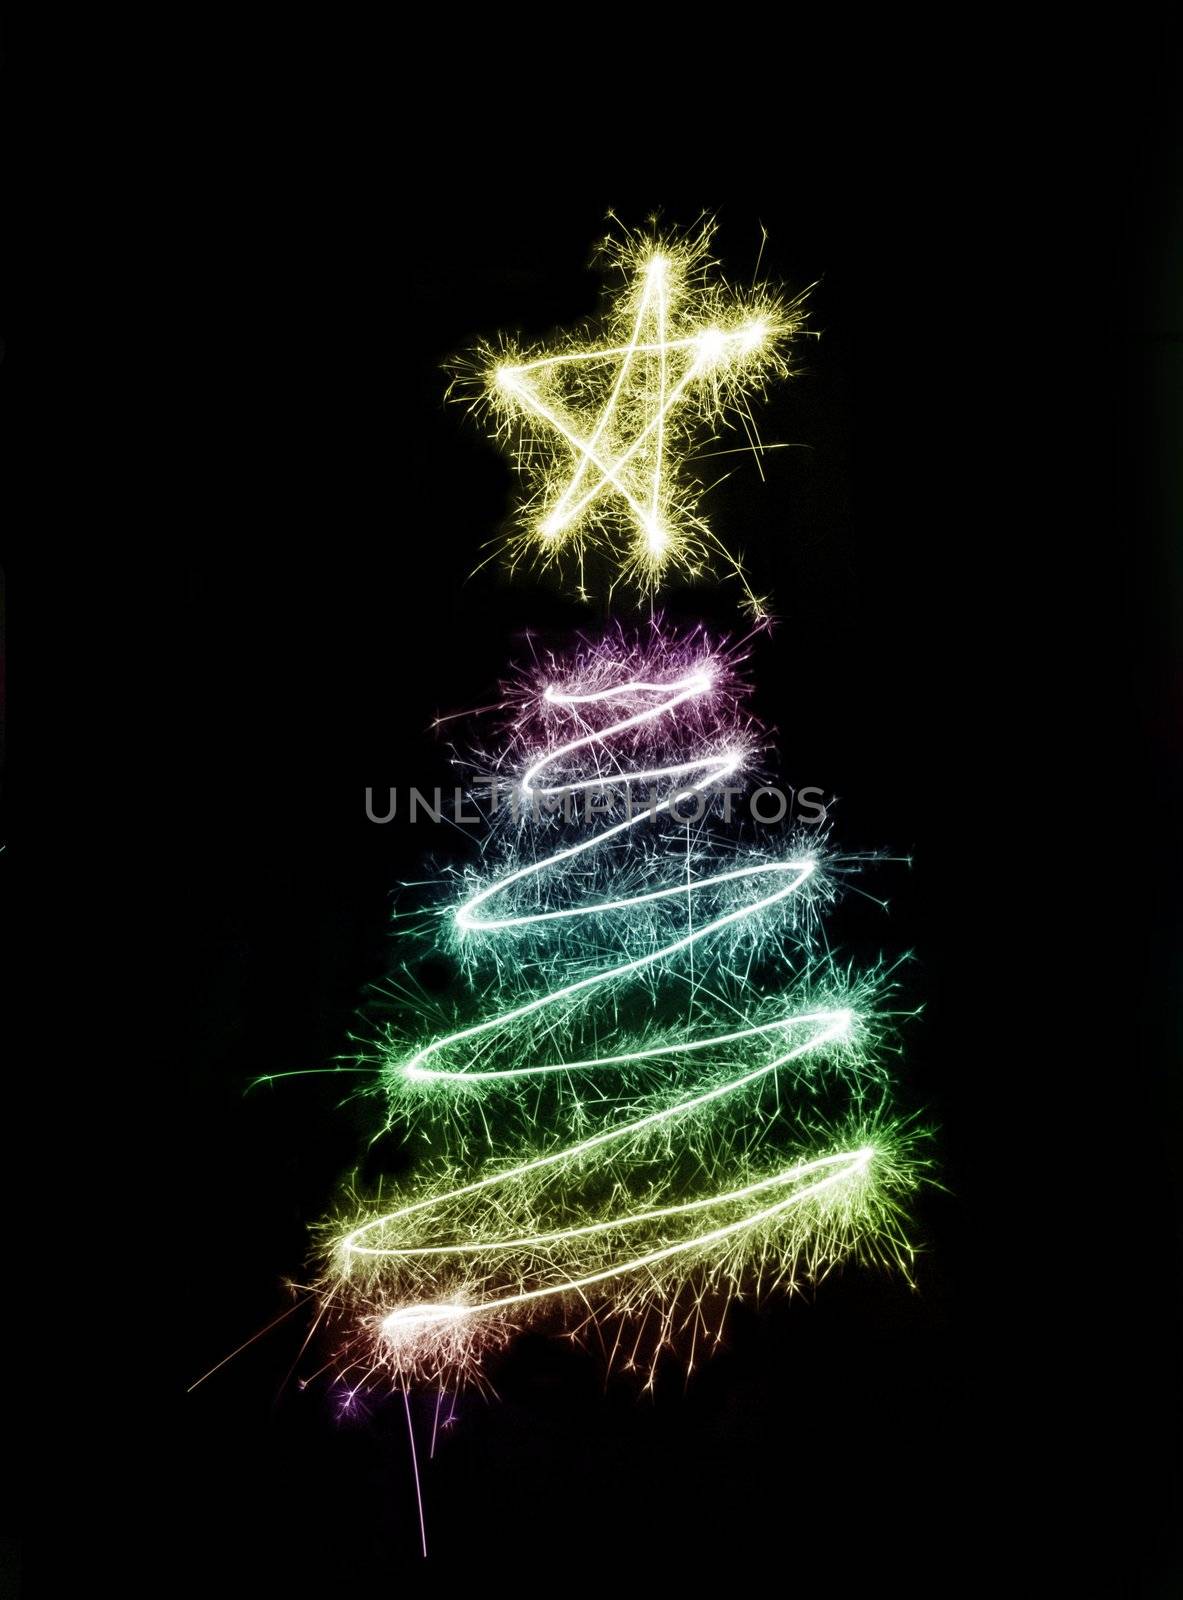 A colourful christmas tree symbol drawn in sparkler trails